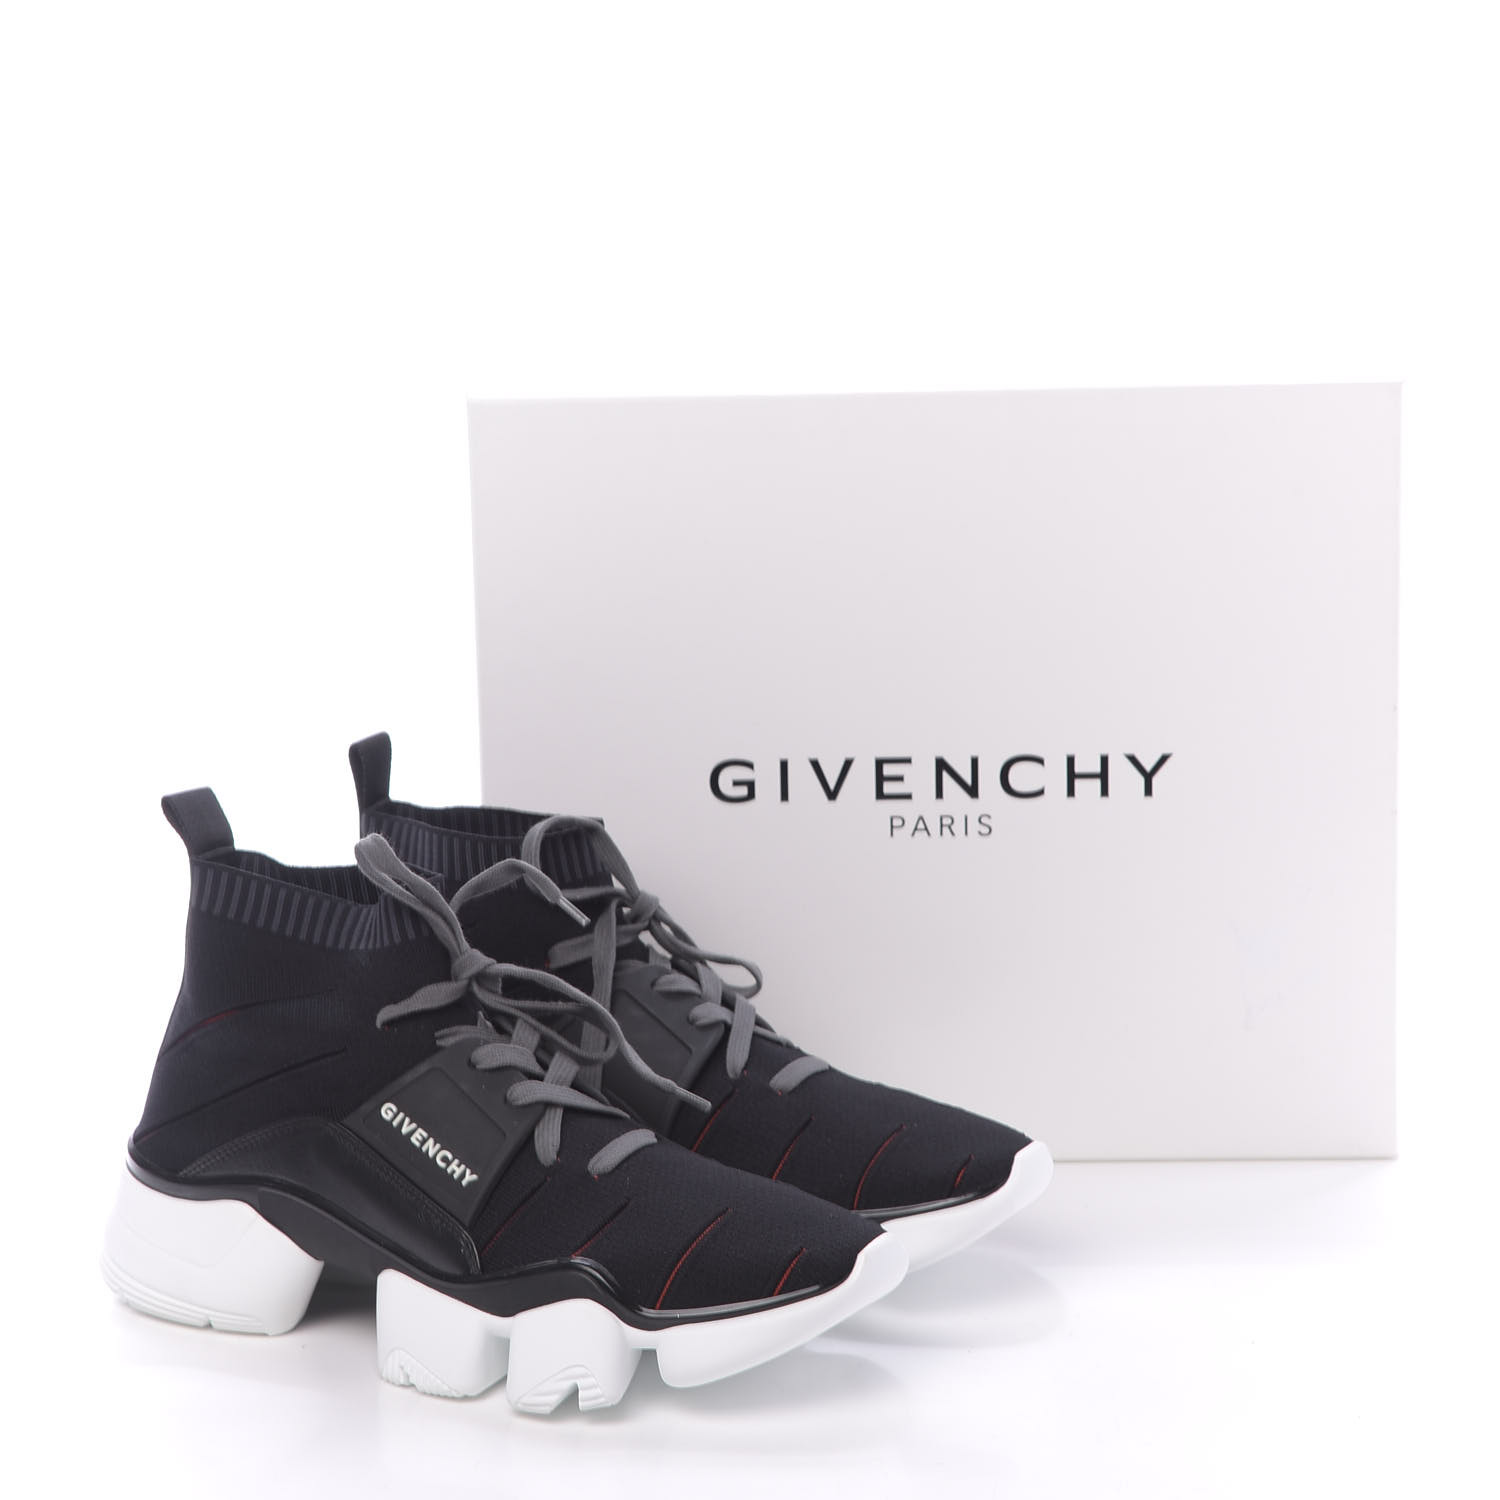 GIVENCHY Calfskin Neoprene Knitted Jaw Contrasted Cut Out Mid 